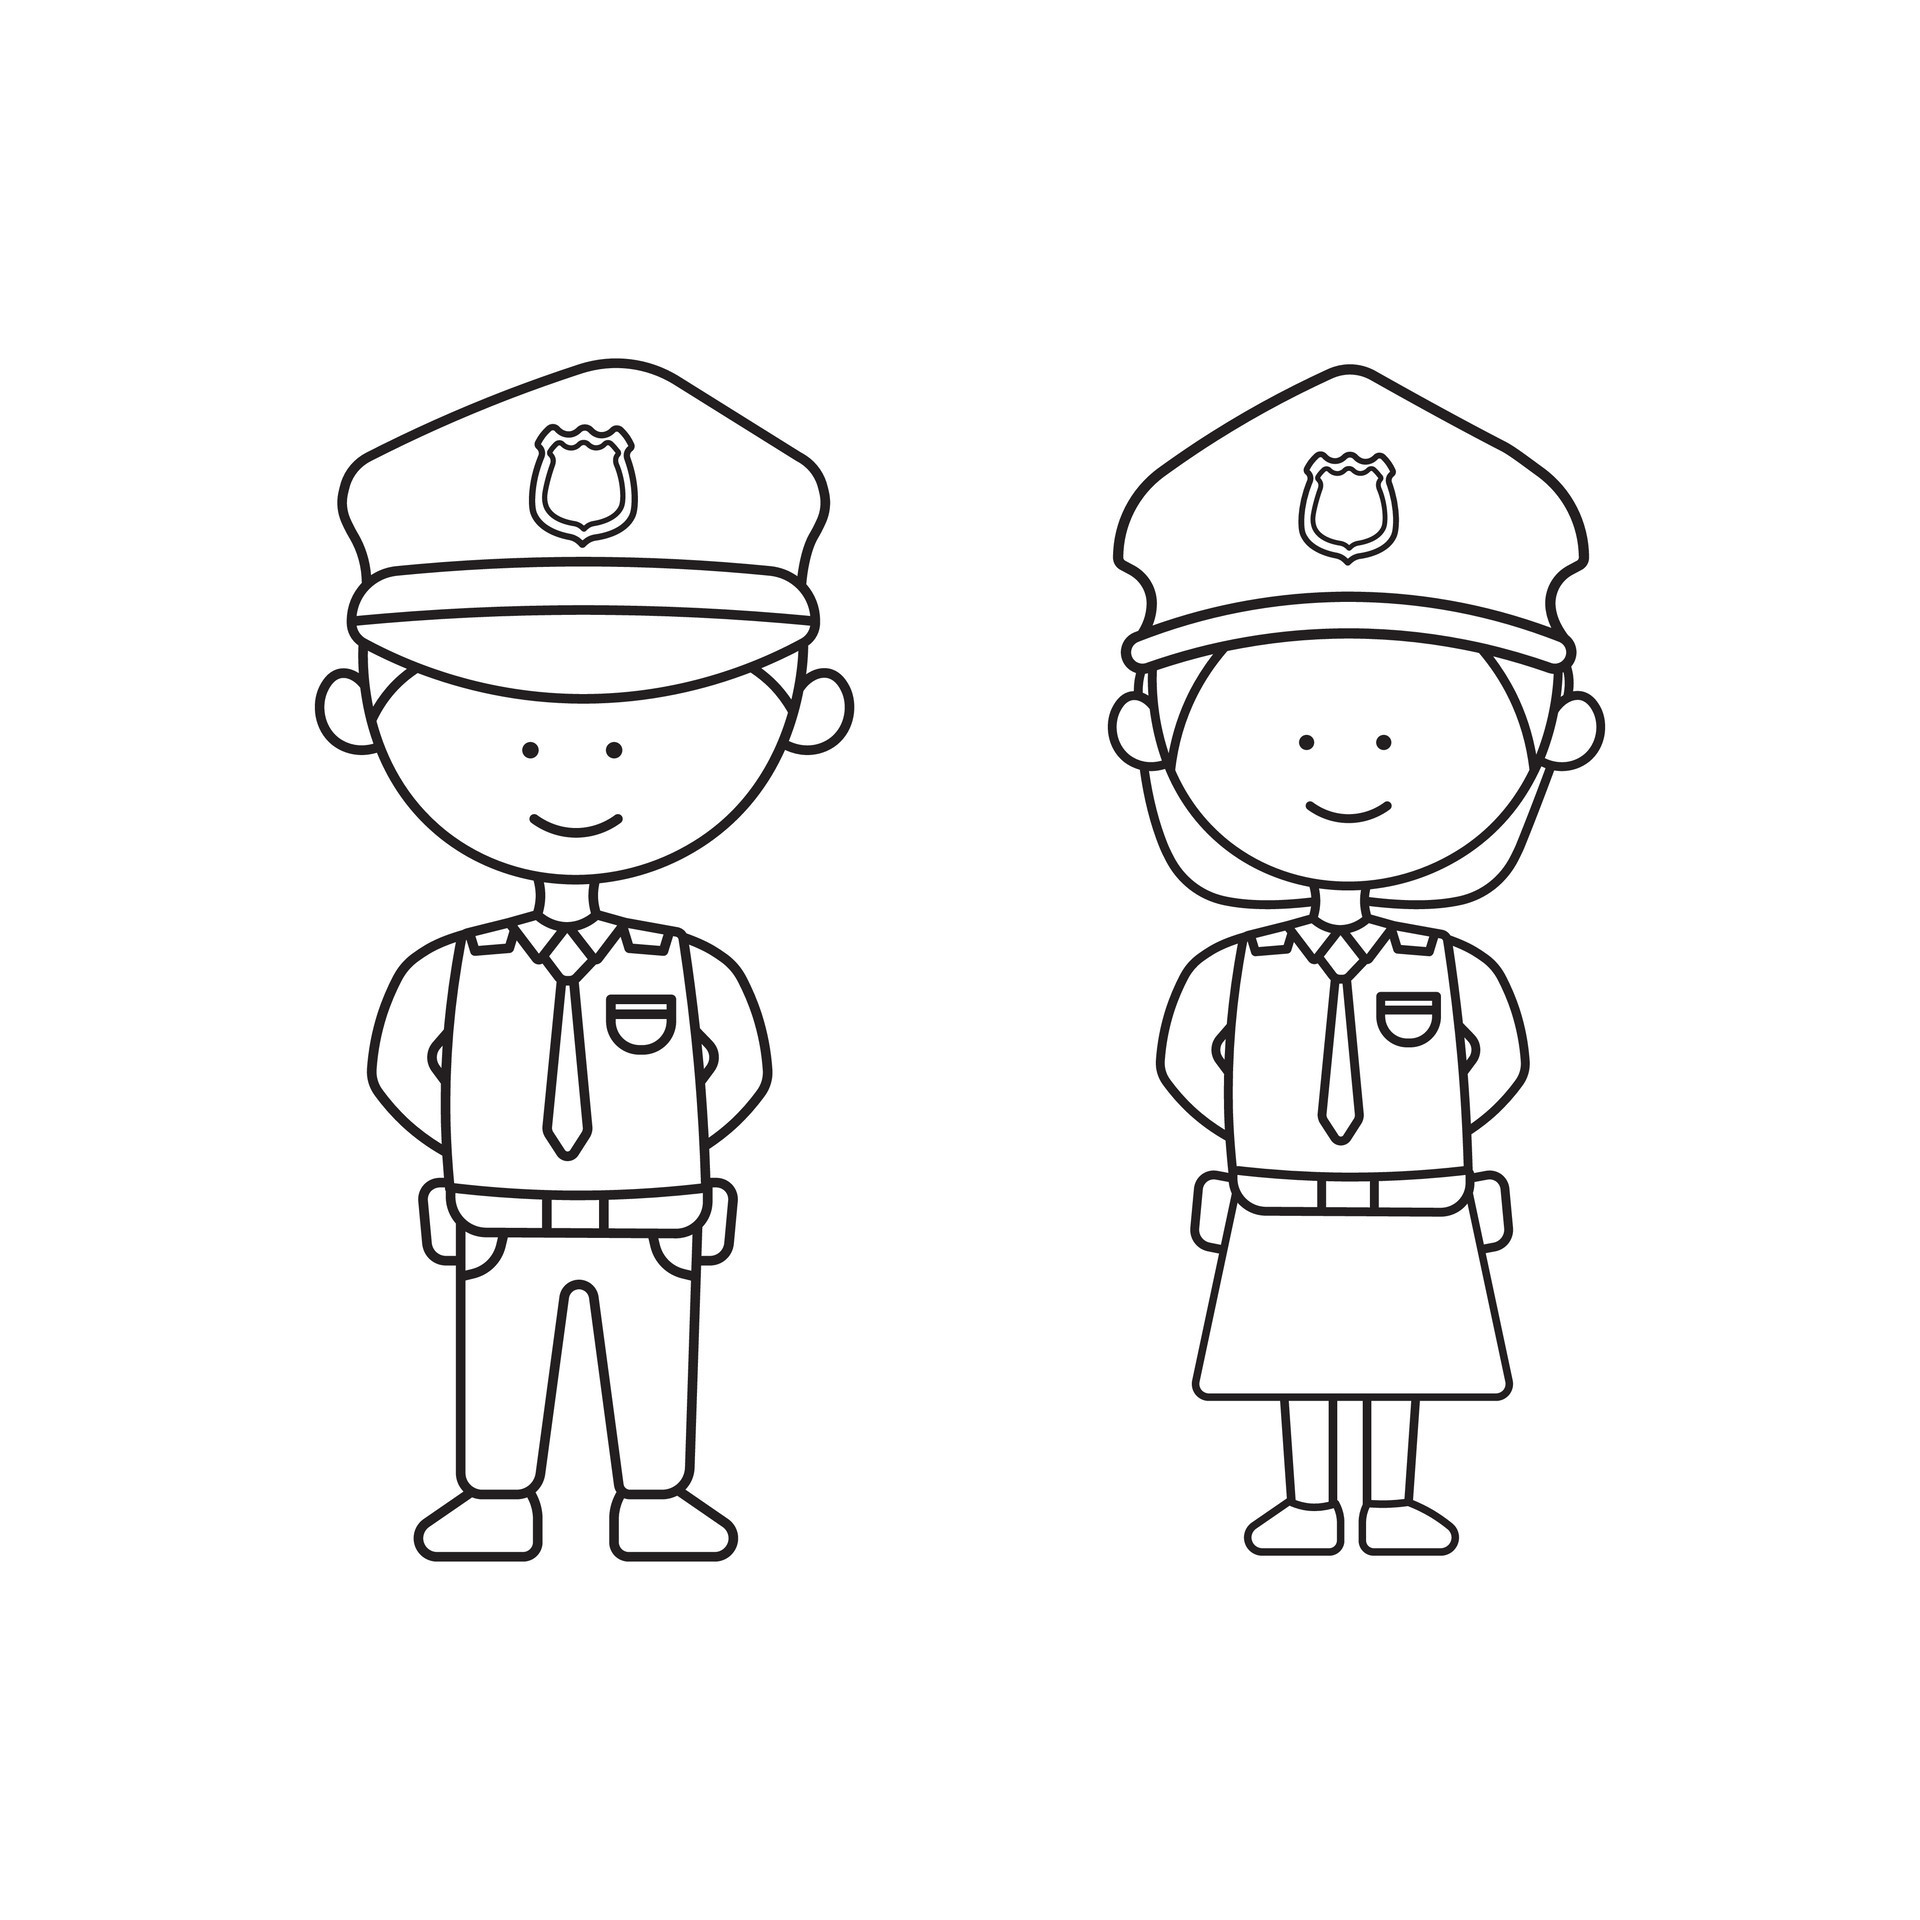 https://static.vecteezy.com/system/resources/previews/025/433/039/original/hand-drawn-kids-drawing-illustration-cute-male-and-female-police-officer-characters-set-flat-cartoon-isolated-vector.jpg